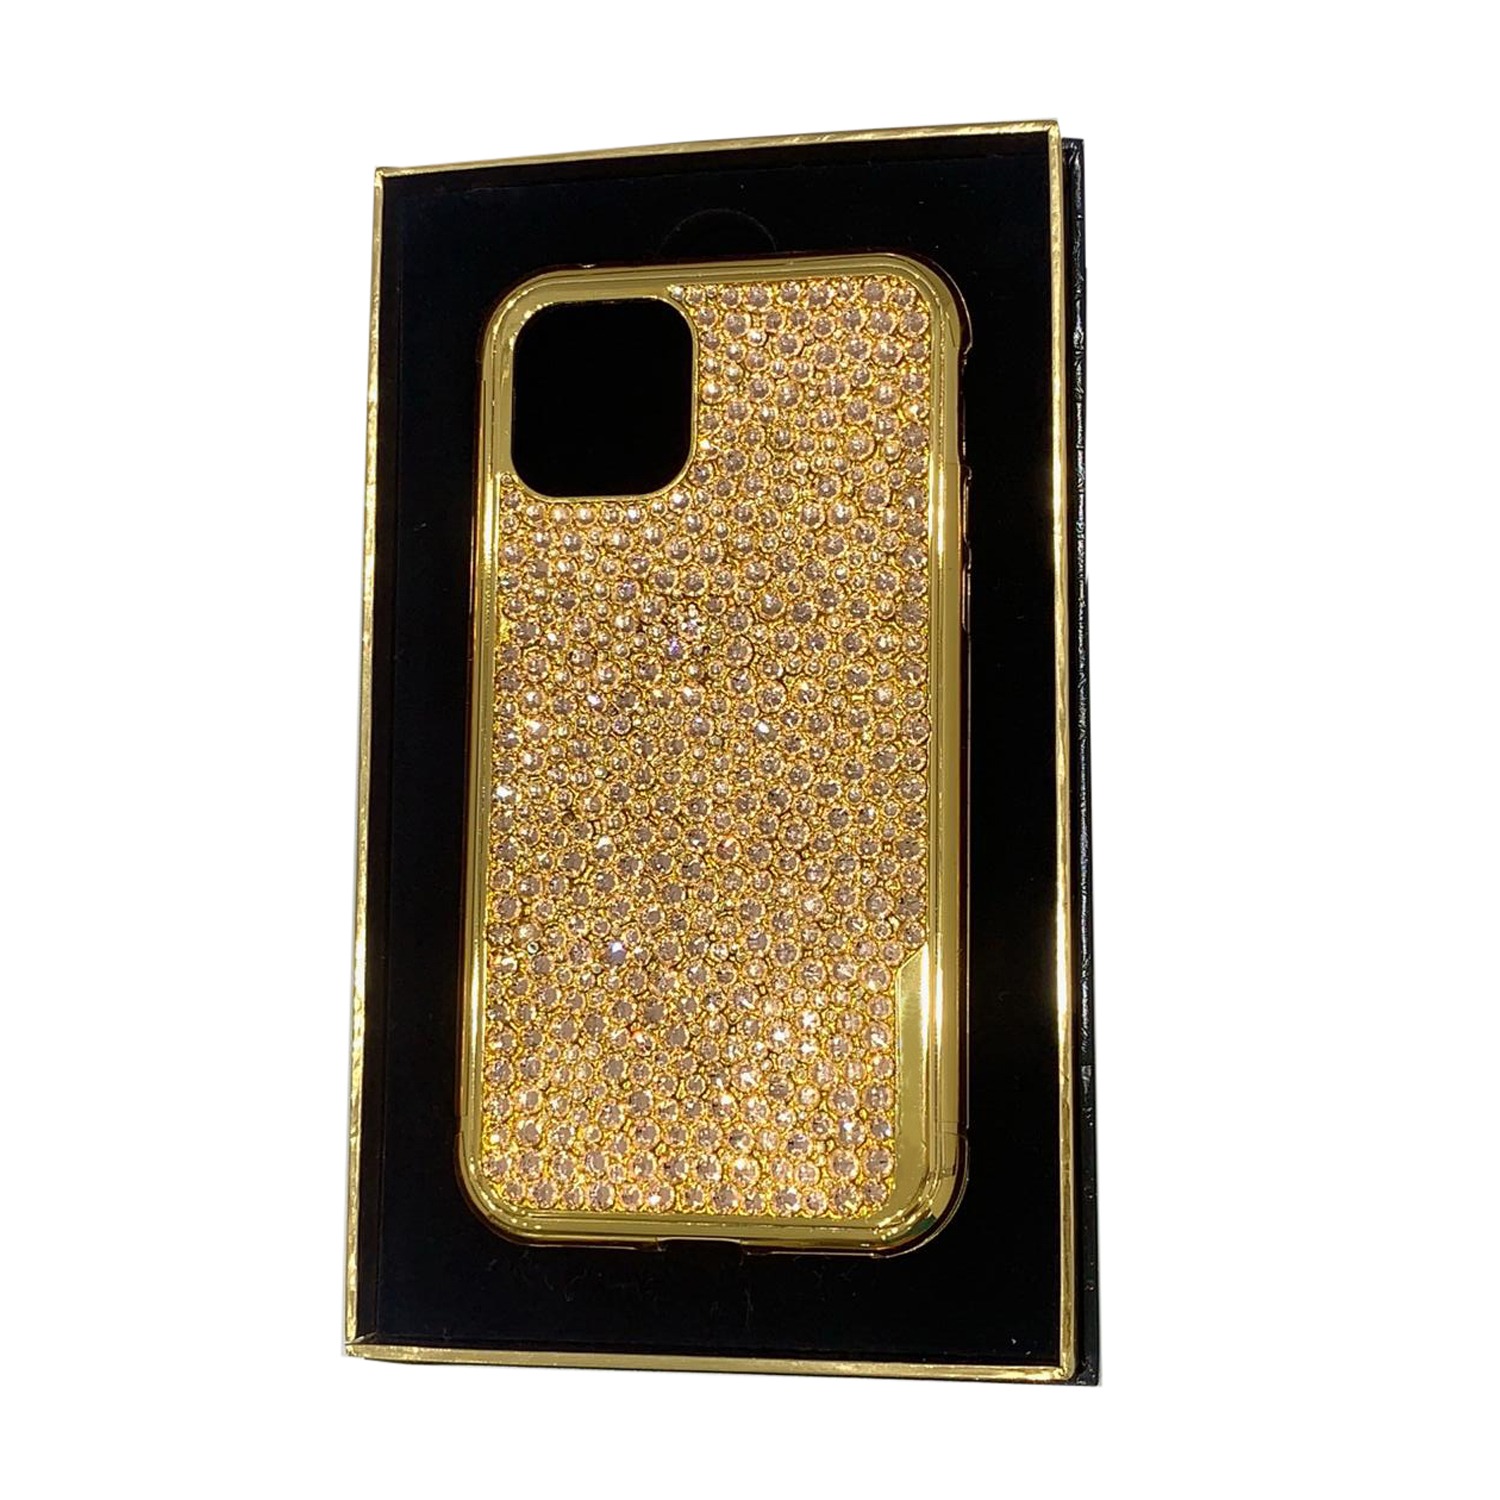 24k Gold Rose Peach Crystal Iphone 12 Pro And Iphone 12 Pro Max Case